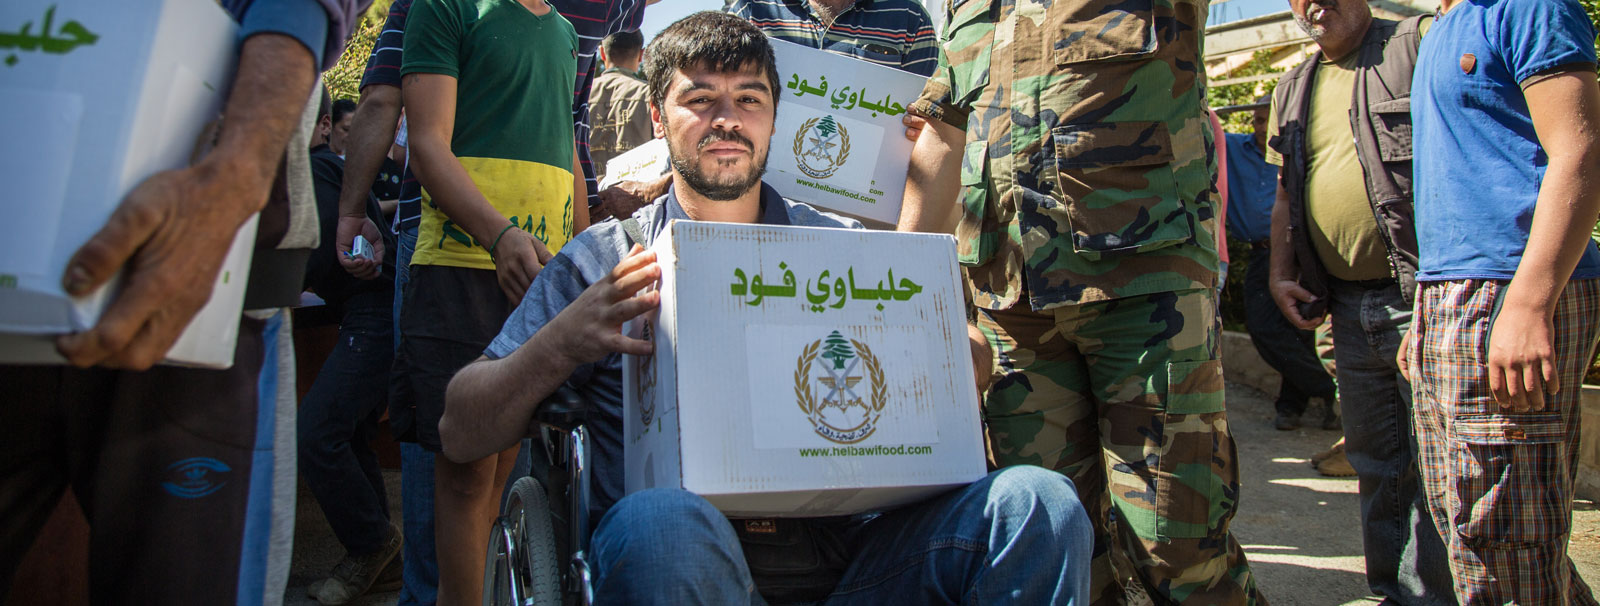 SoA teams up with US troops and the Lebanese Army to support civilians victimized by ISIS